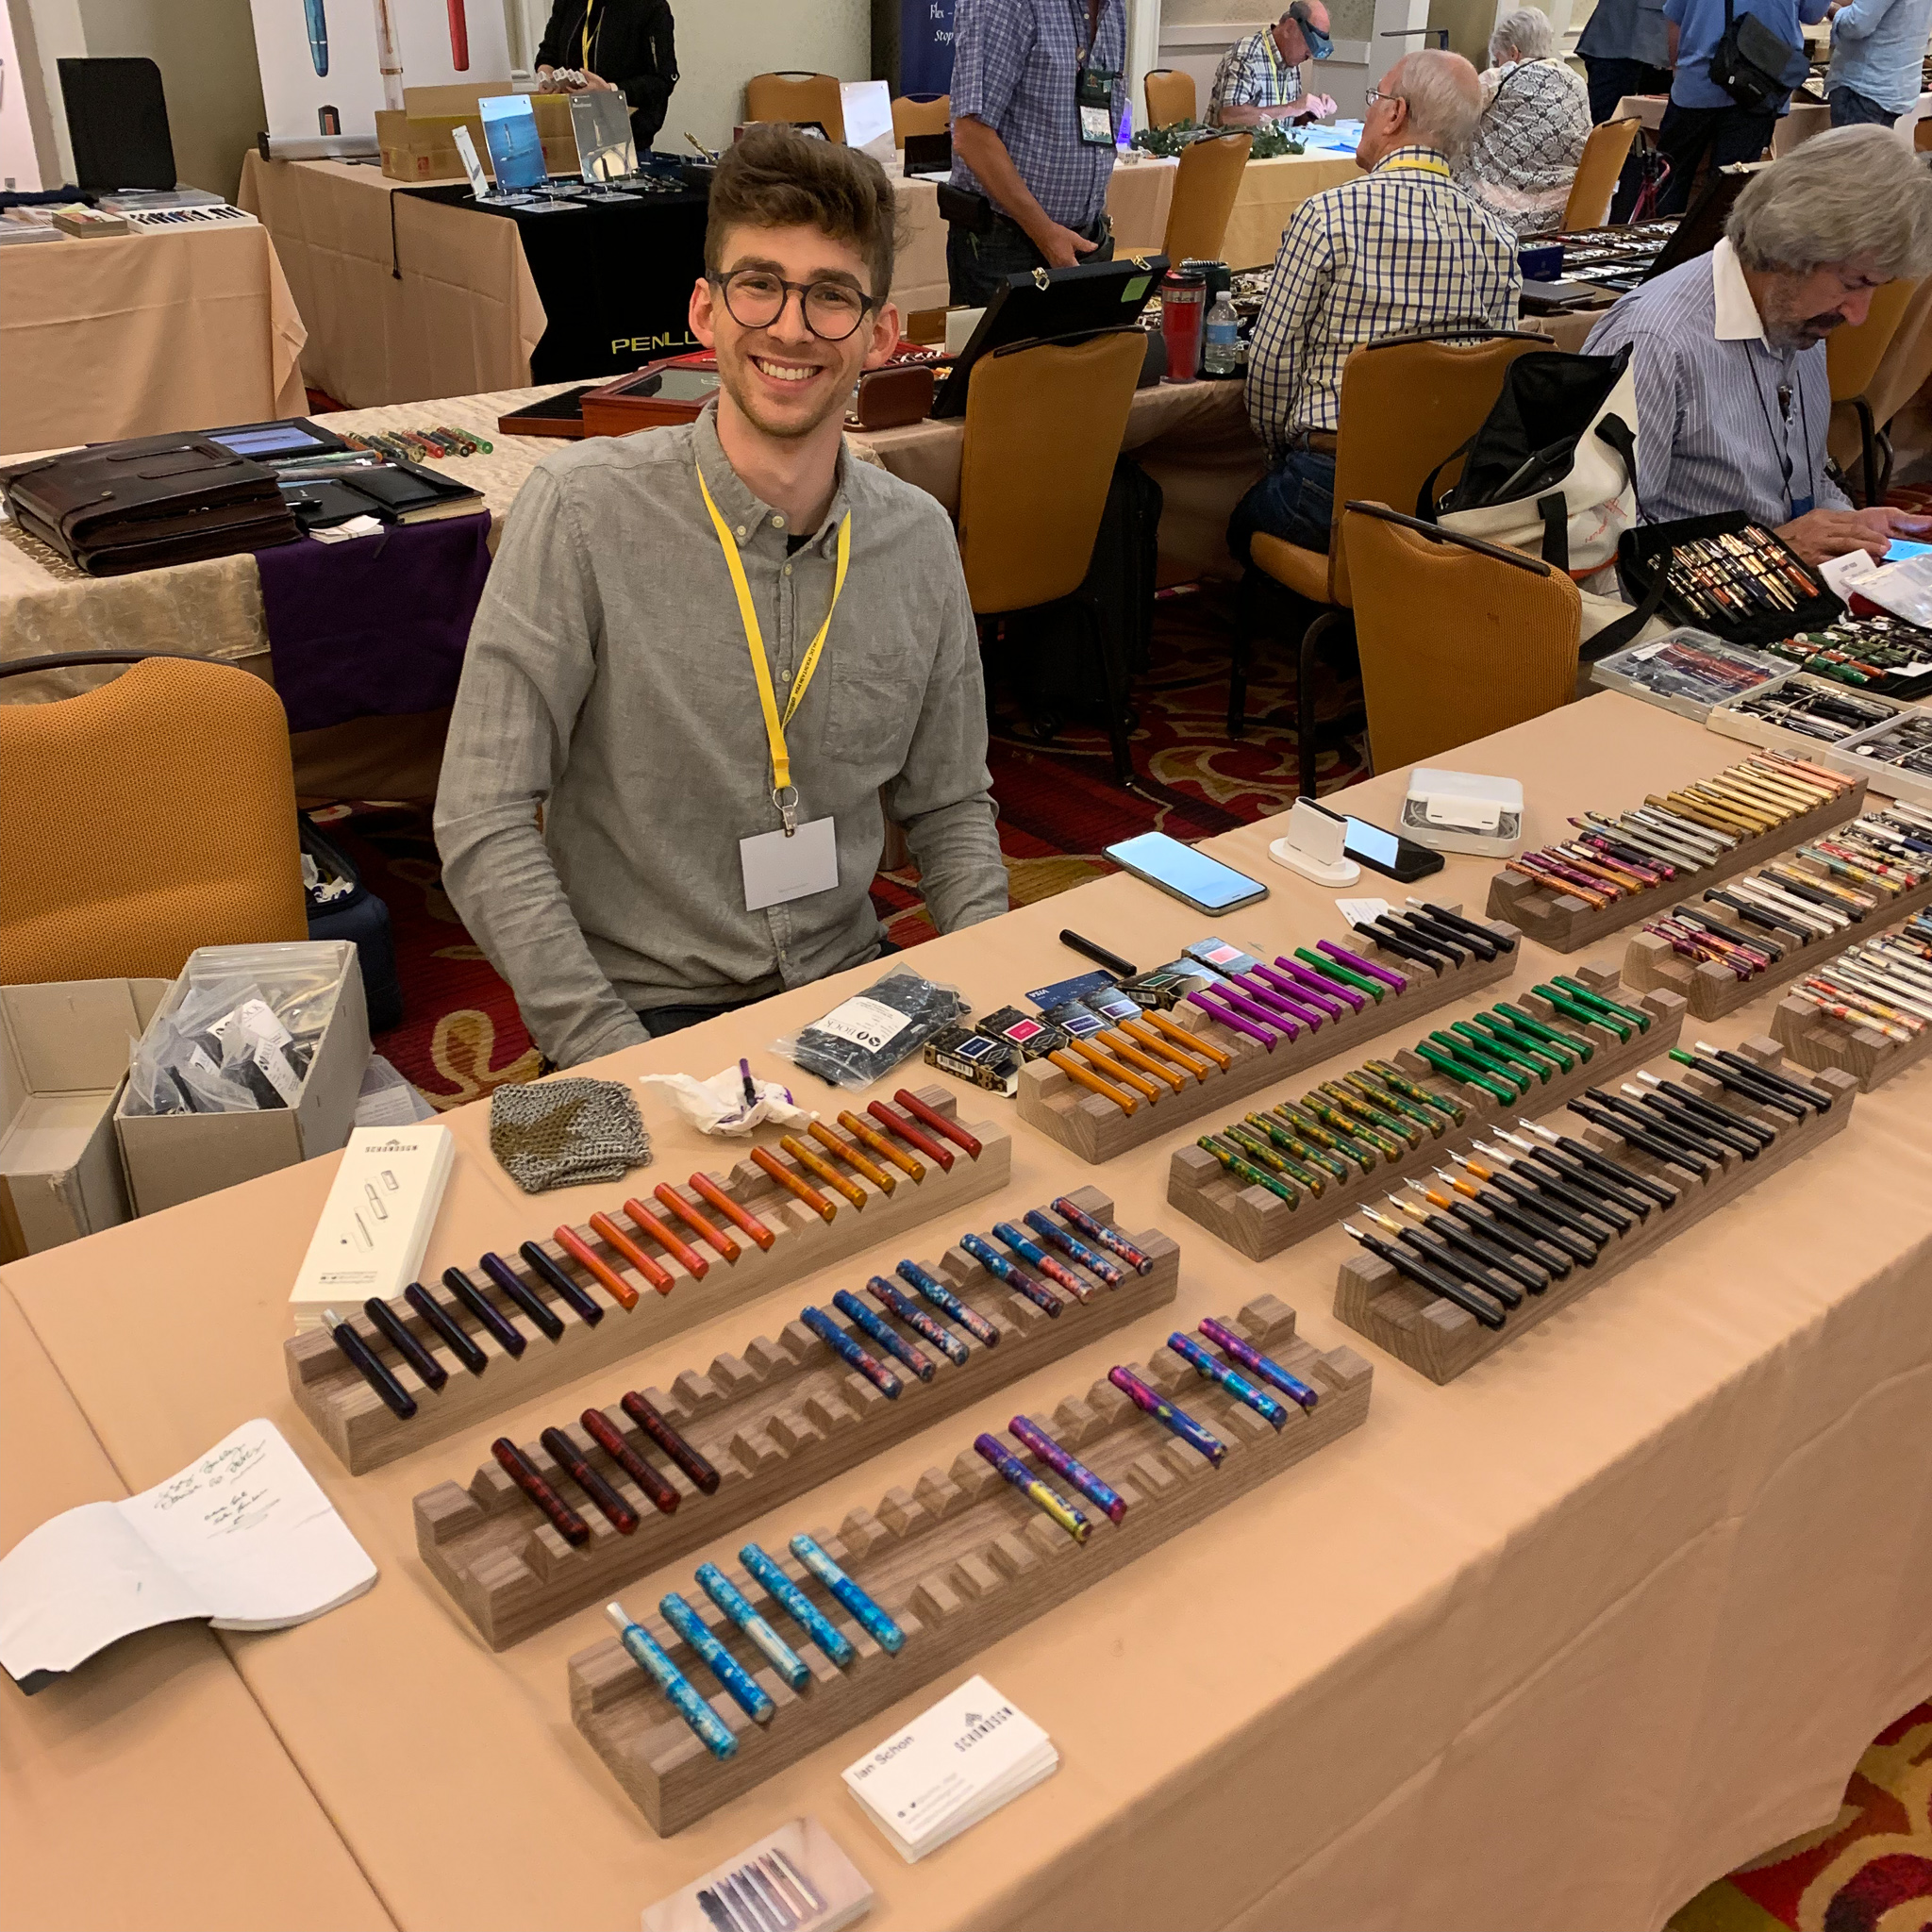 Scenes from Friday and Saturday at the 2019 DC Pen Show — The Gentleman